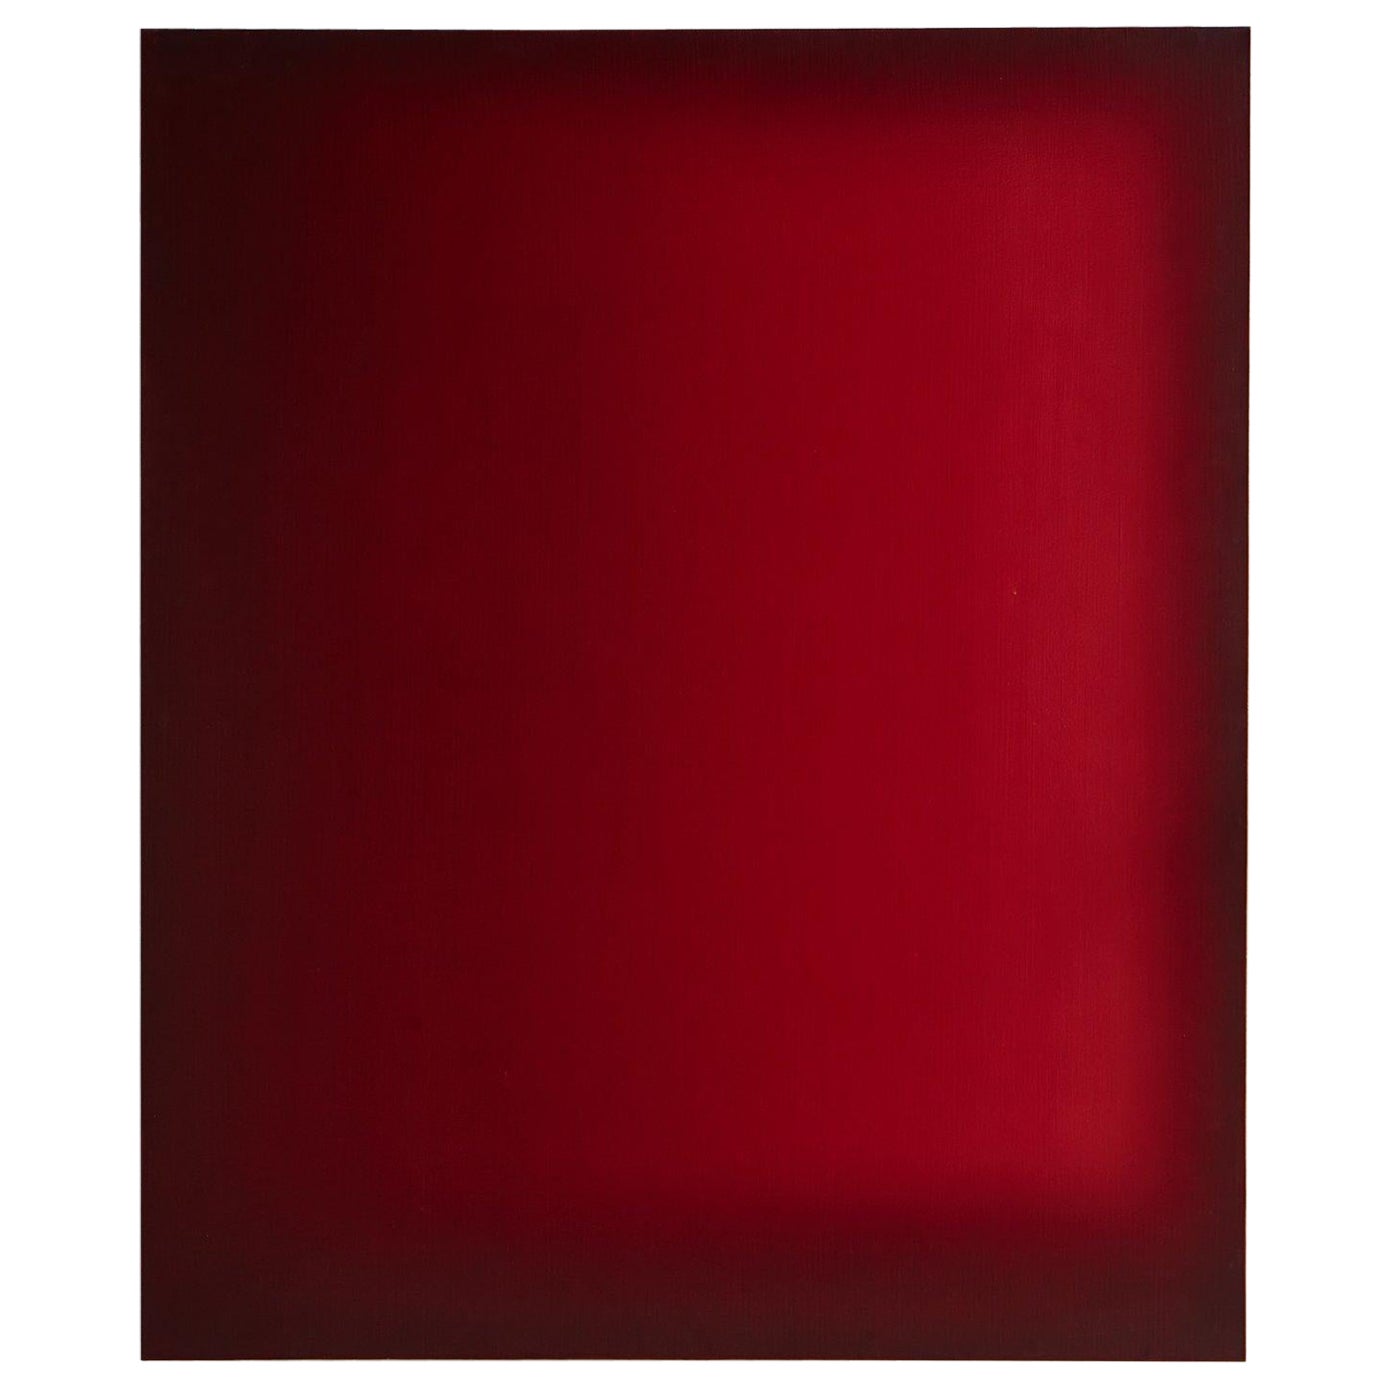 Red Axiom by Marc Ross, 2003